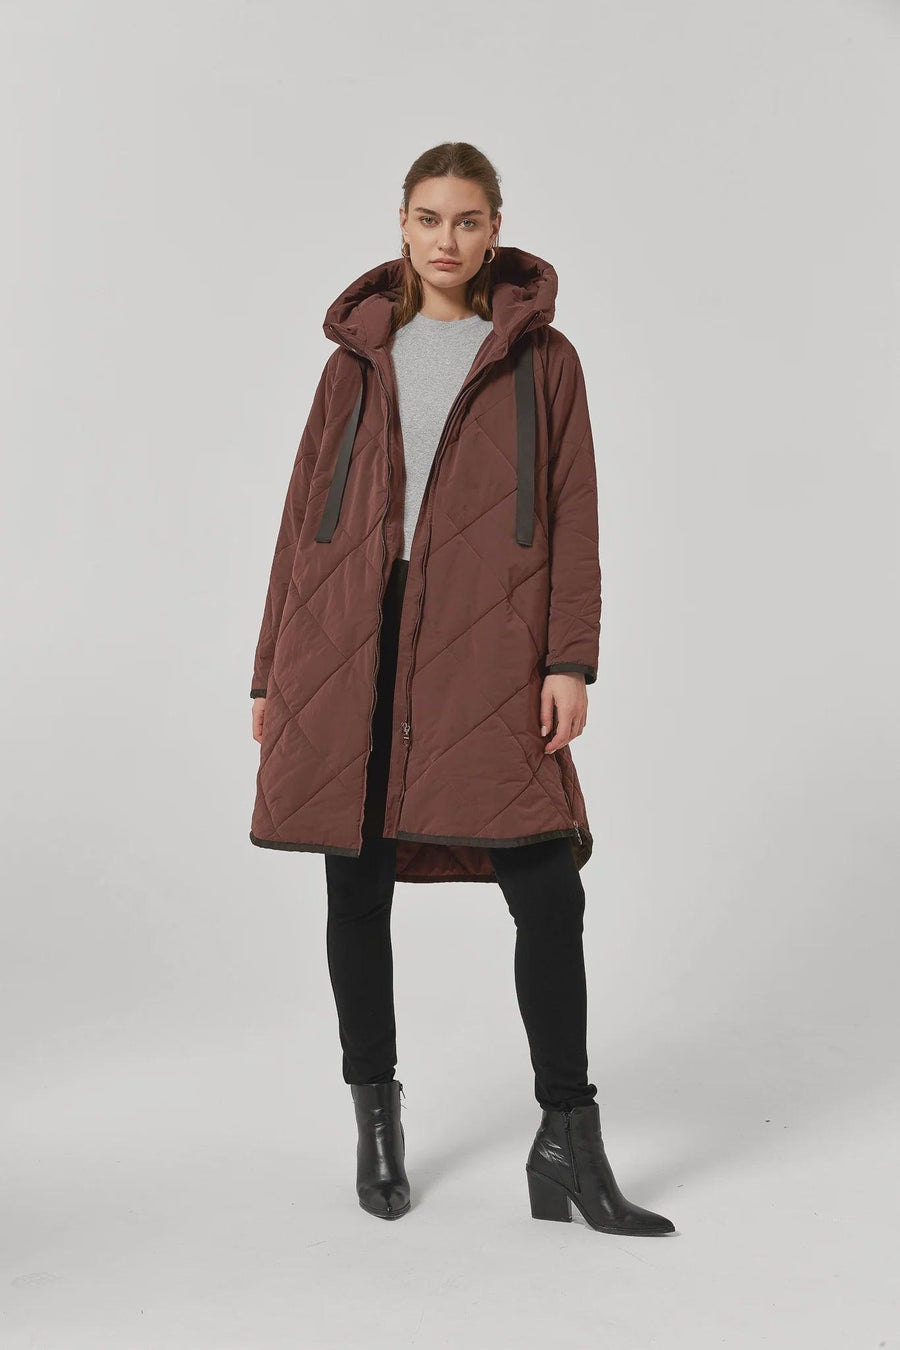 Shop Zip Hem Winter Coat Berry Brown - At Kohl and Soda | Ready To Ship!